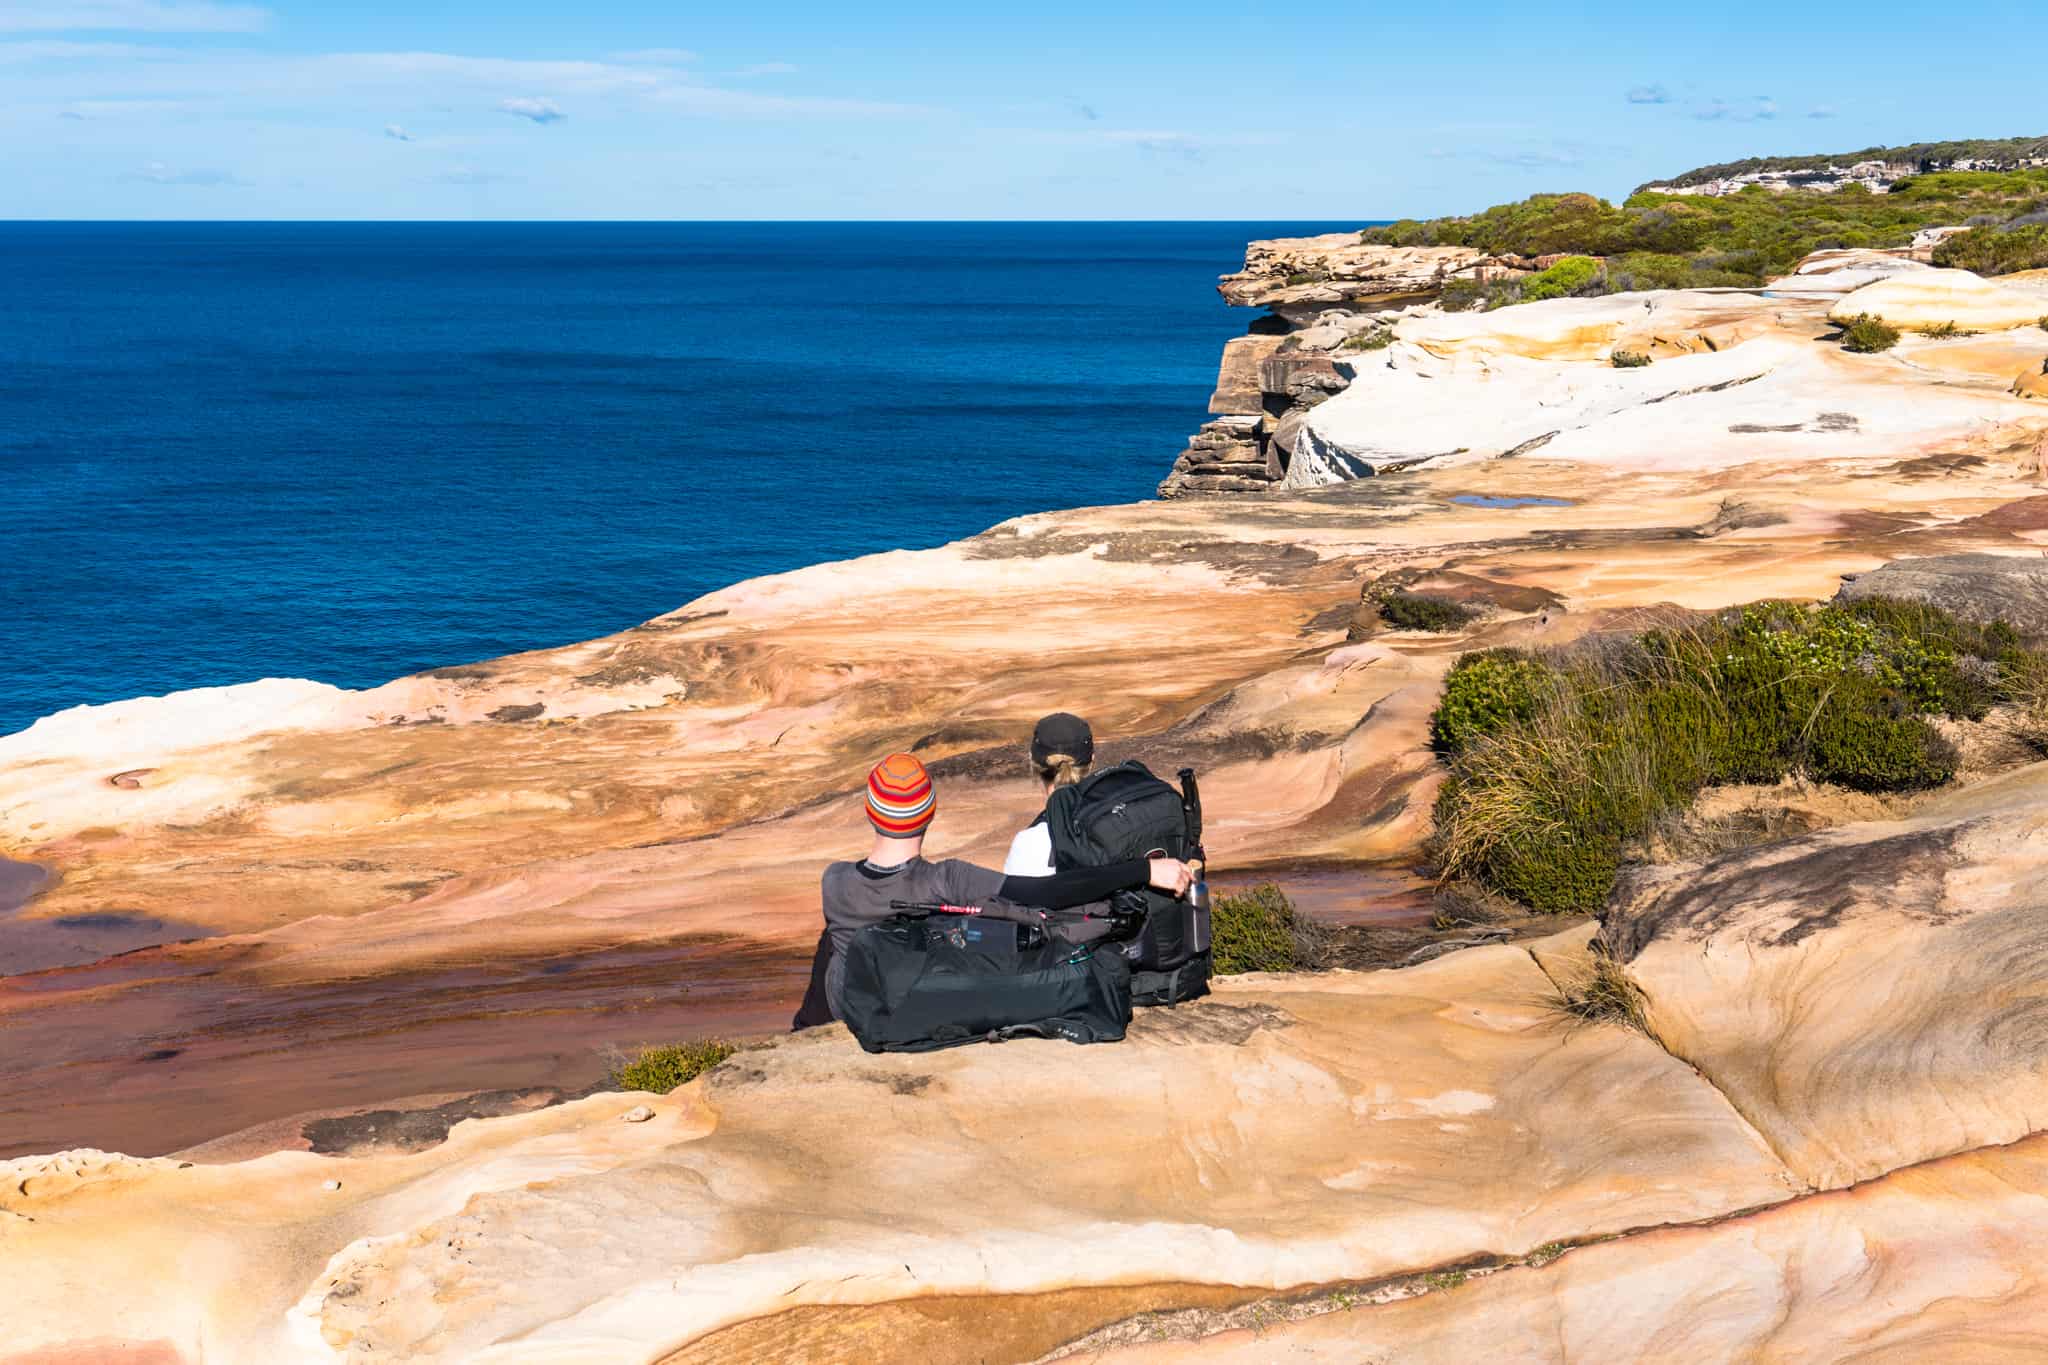 Taking in the views on the Coast Track in Royal National Park.